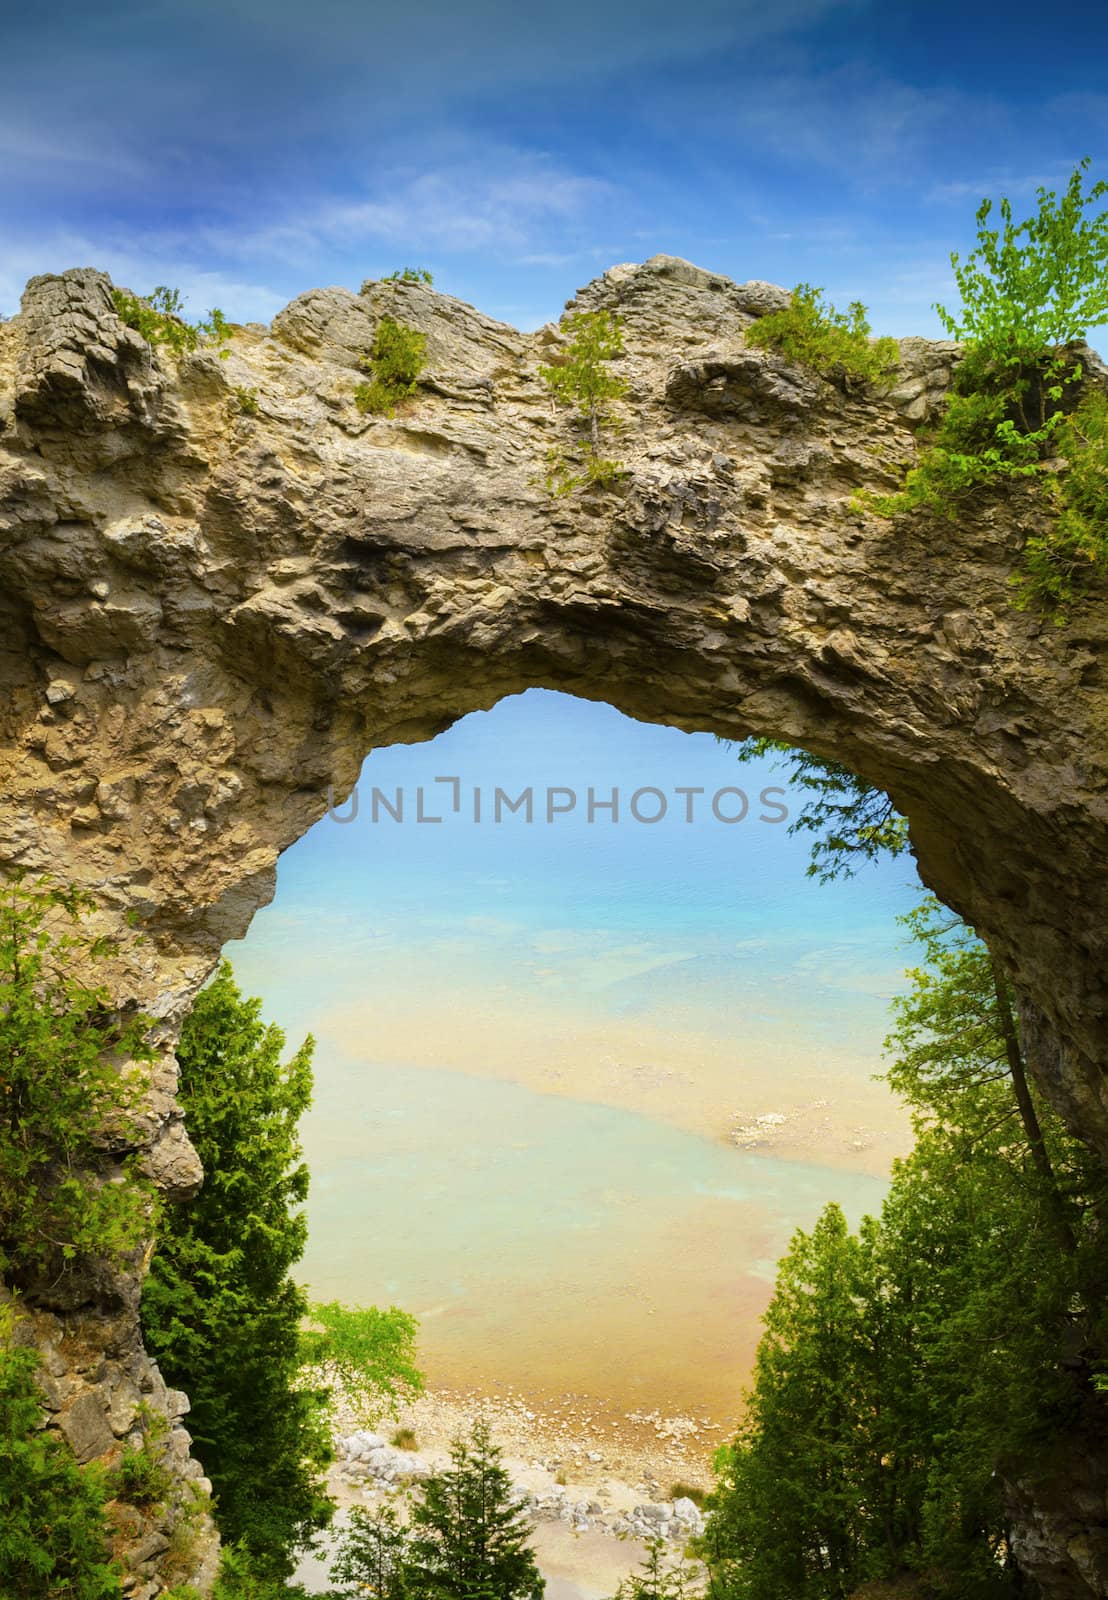 Arch Rock on Mackinac Island, Michigan, a stone formation forming a natural archway.